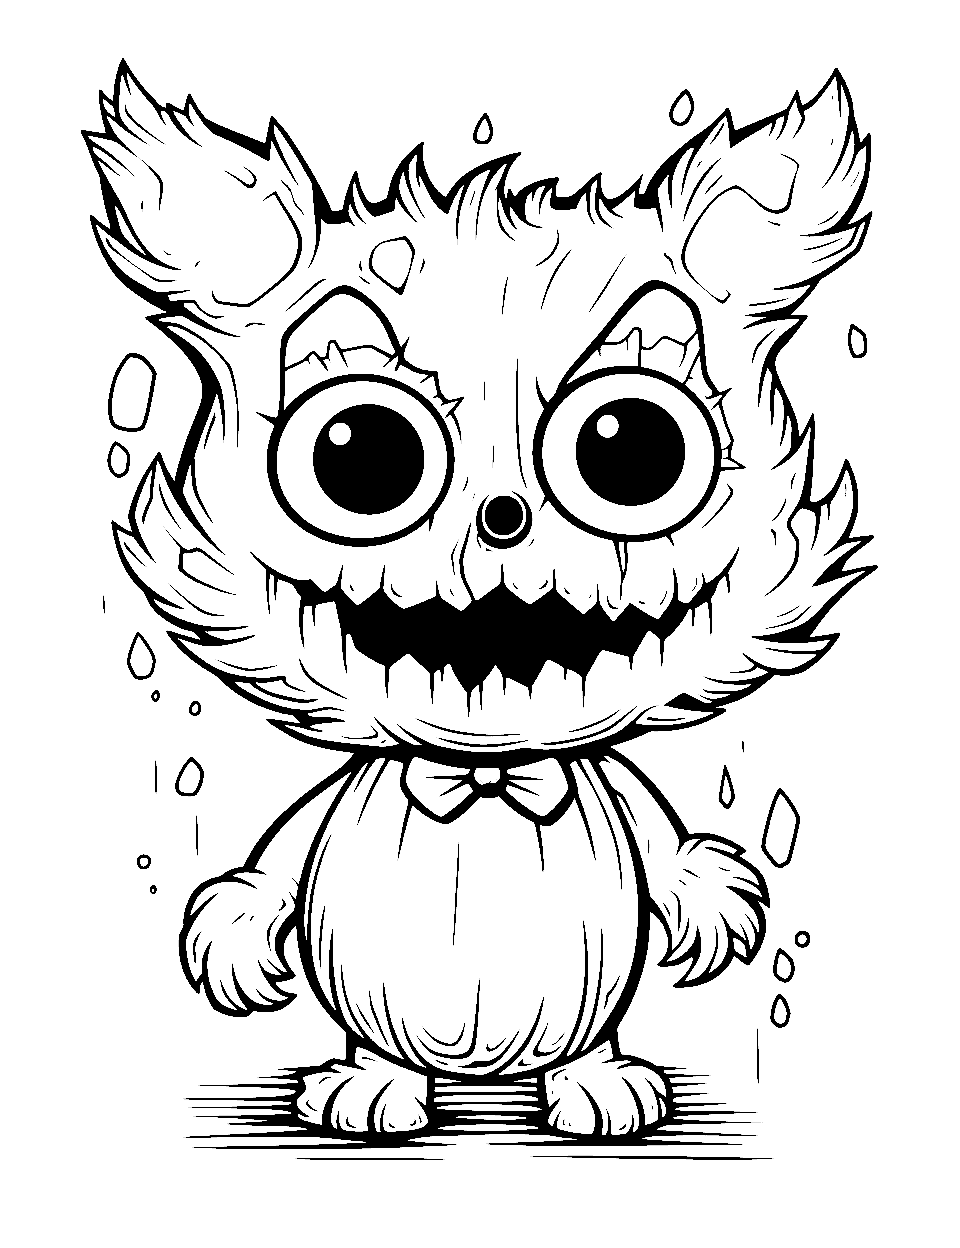 Withered Freddy FNAF Coloring Page - Free Printable Coloring Pages